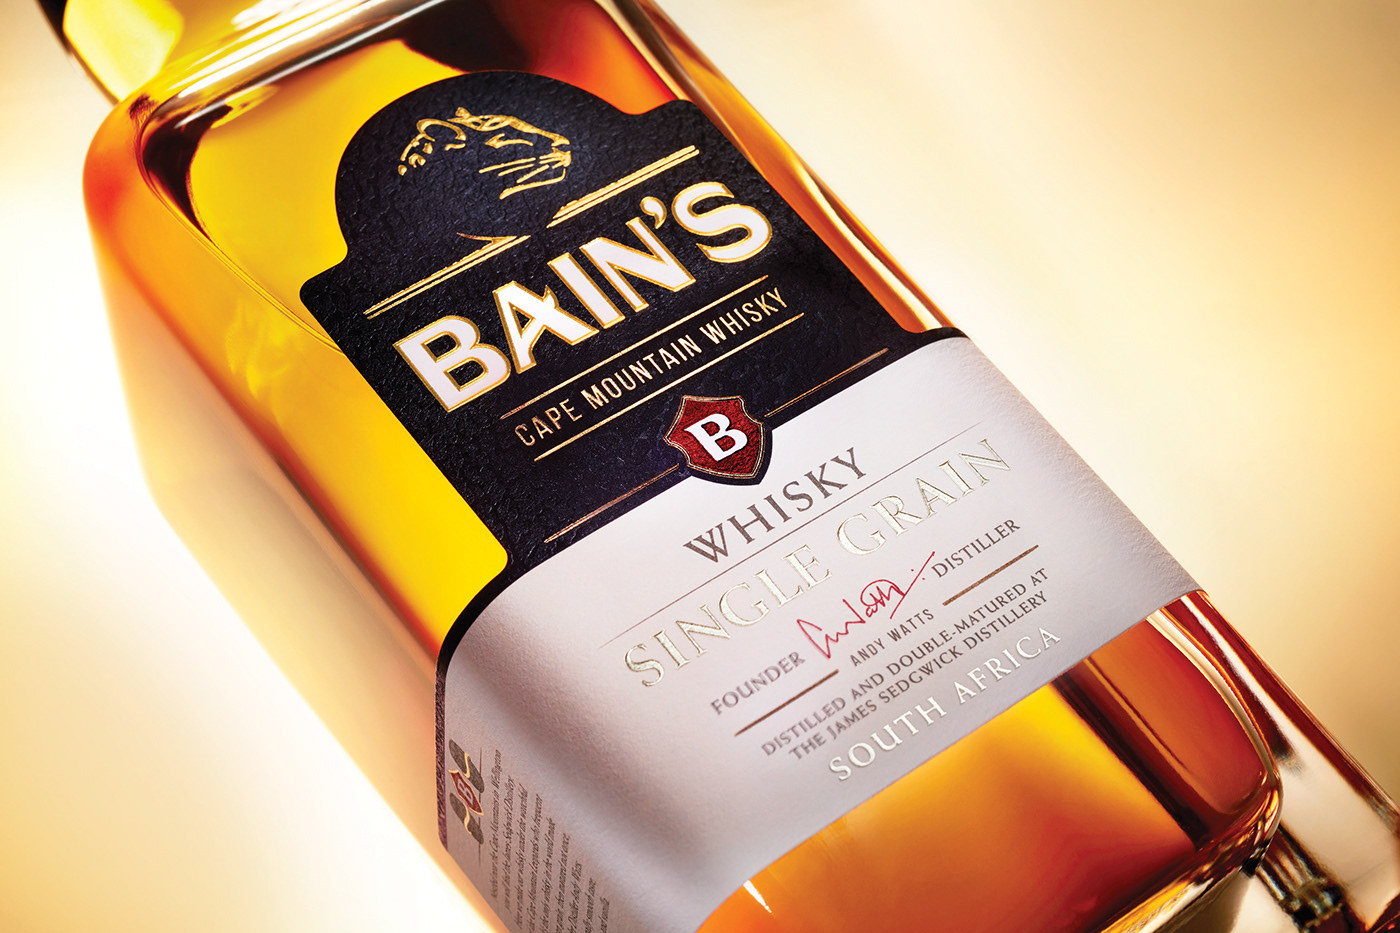 Redesign of Bain’s Cape Mountain Whisky